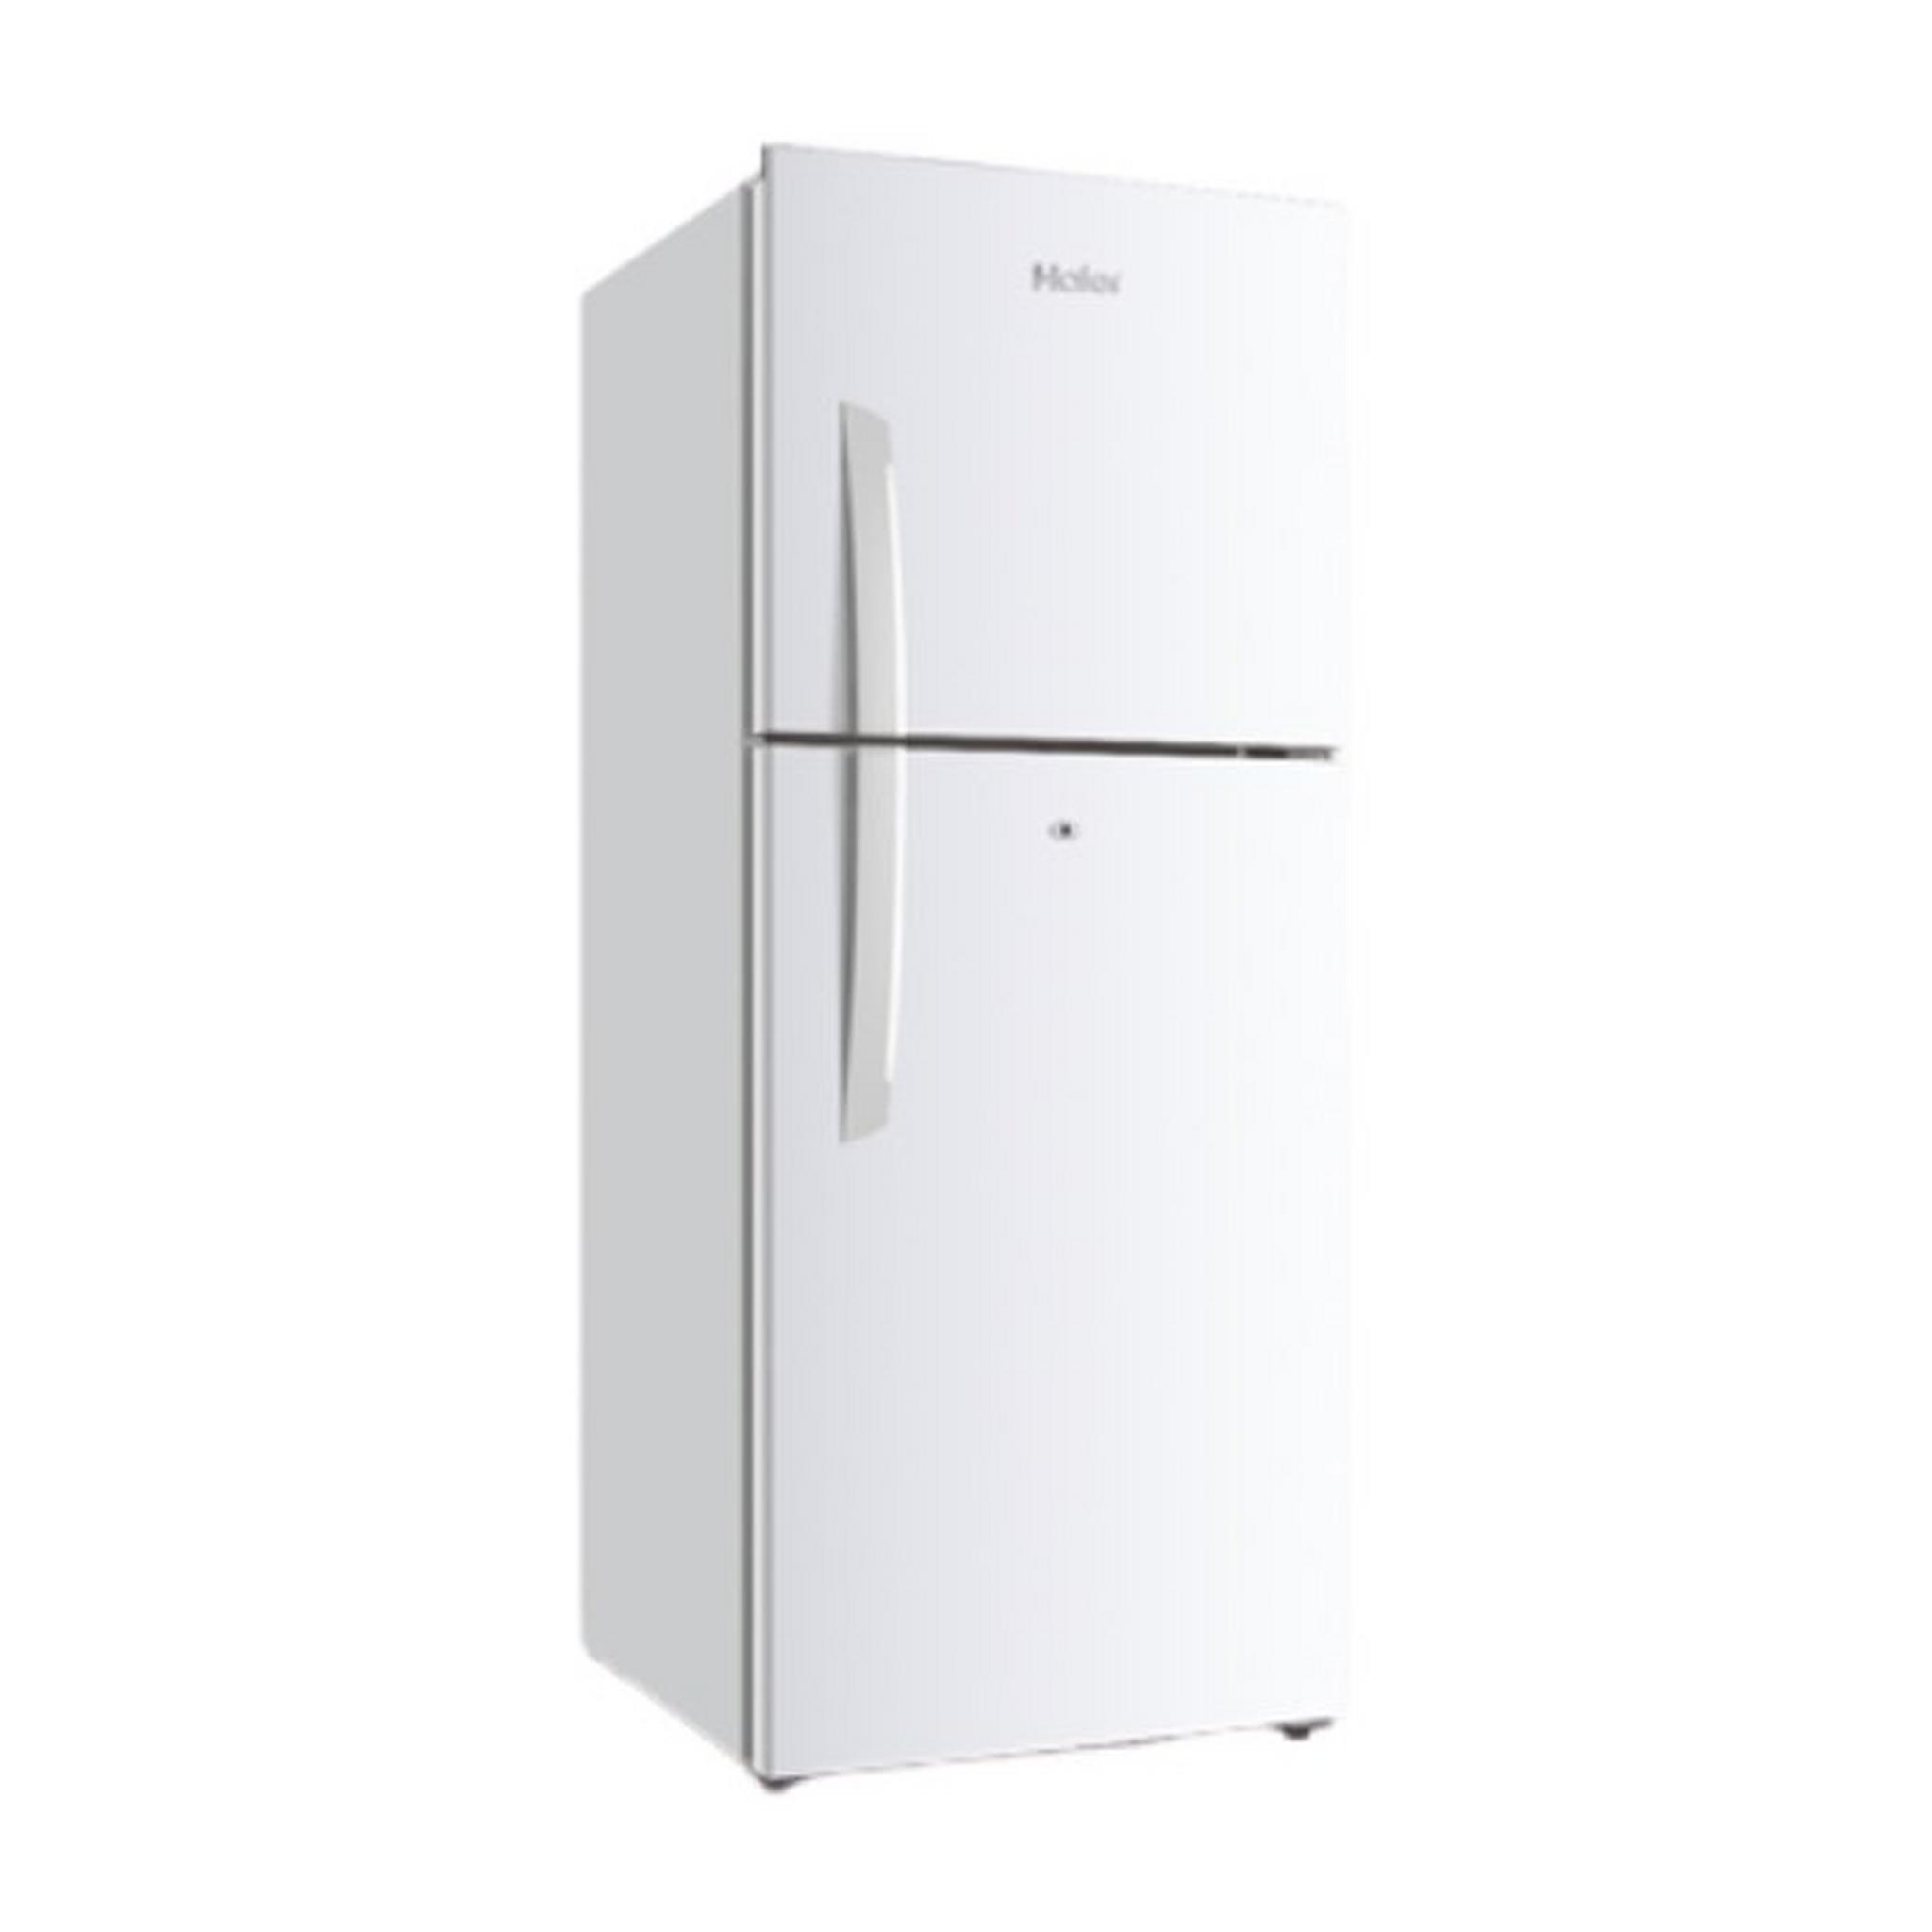 Haier 13CFT Top Mount Refrigerator (HRF-380WH)